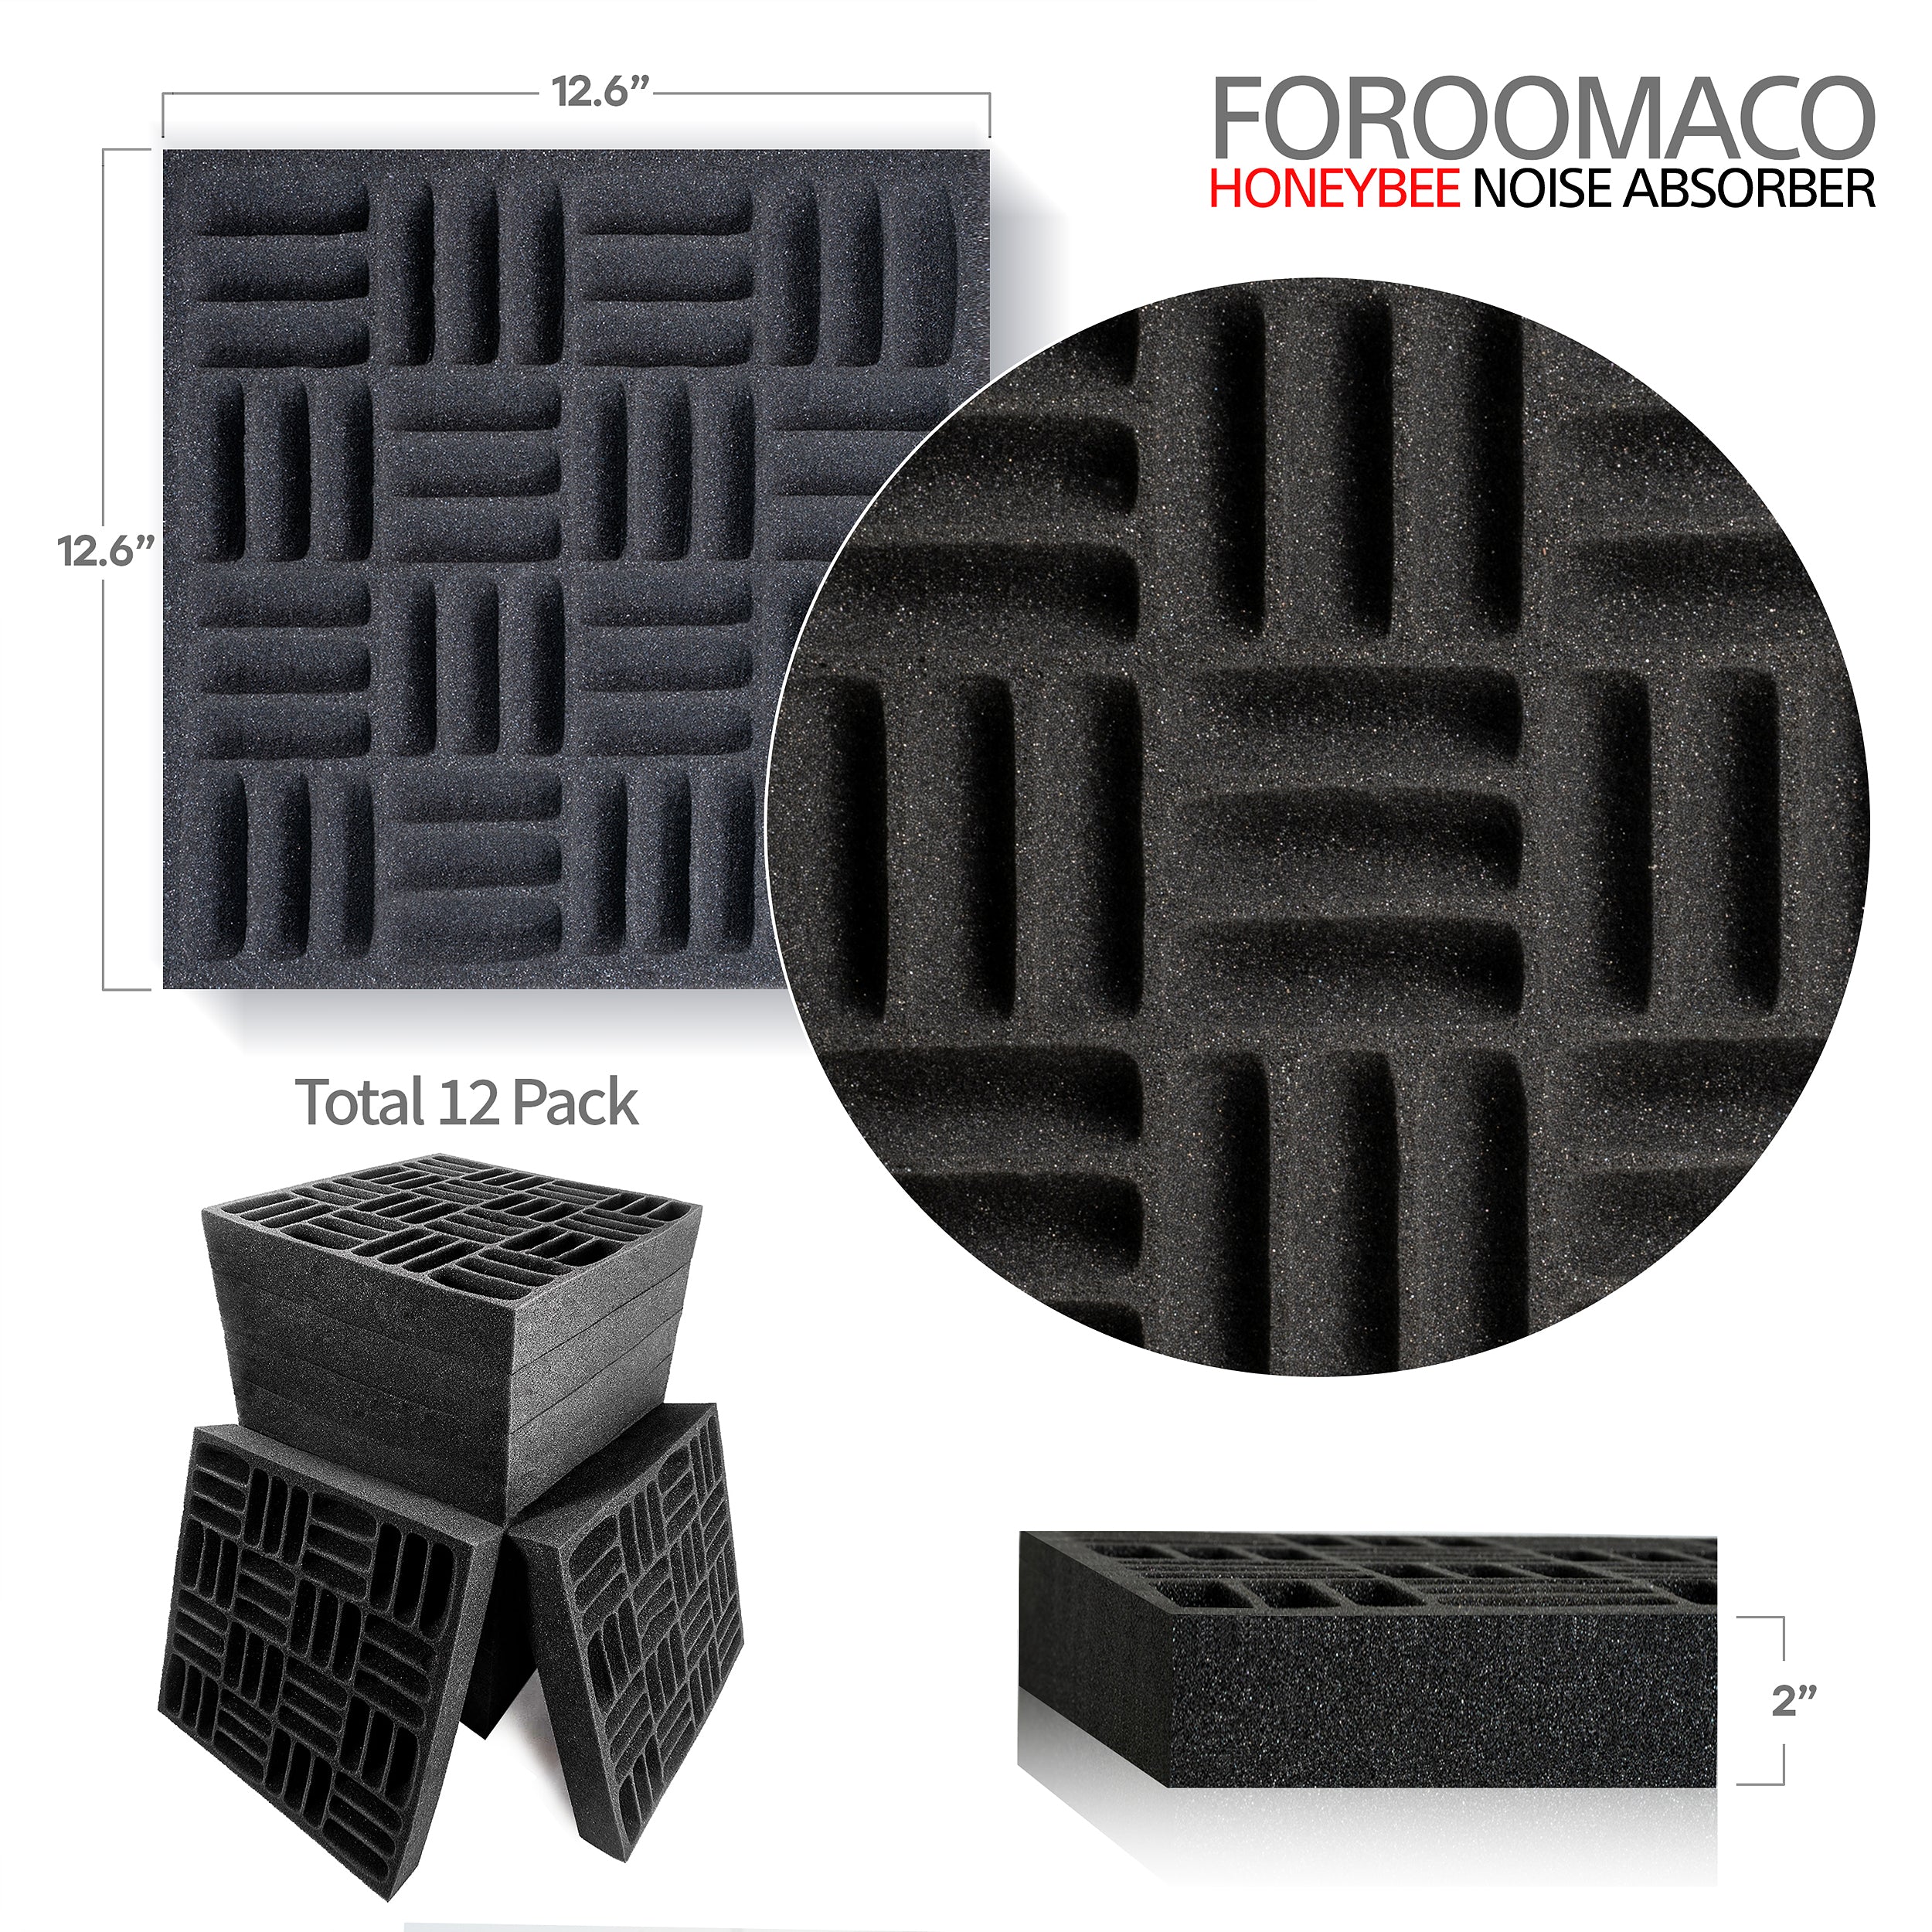 Foroomaco Acoustic foam panels black dimension and detail